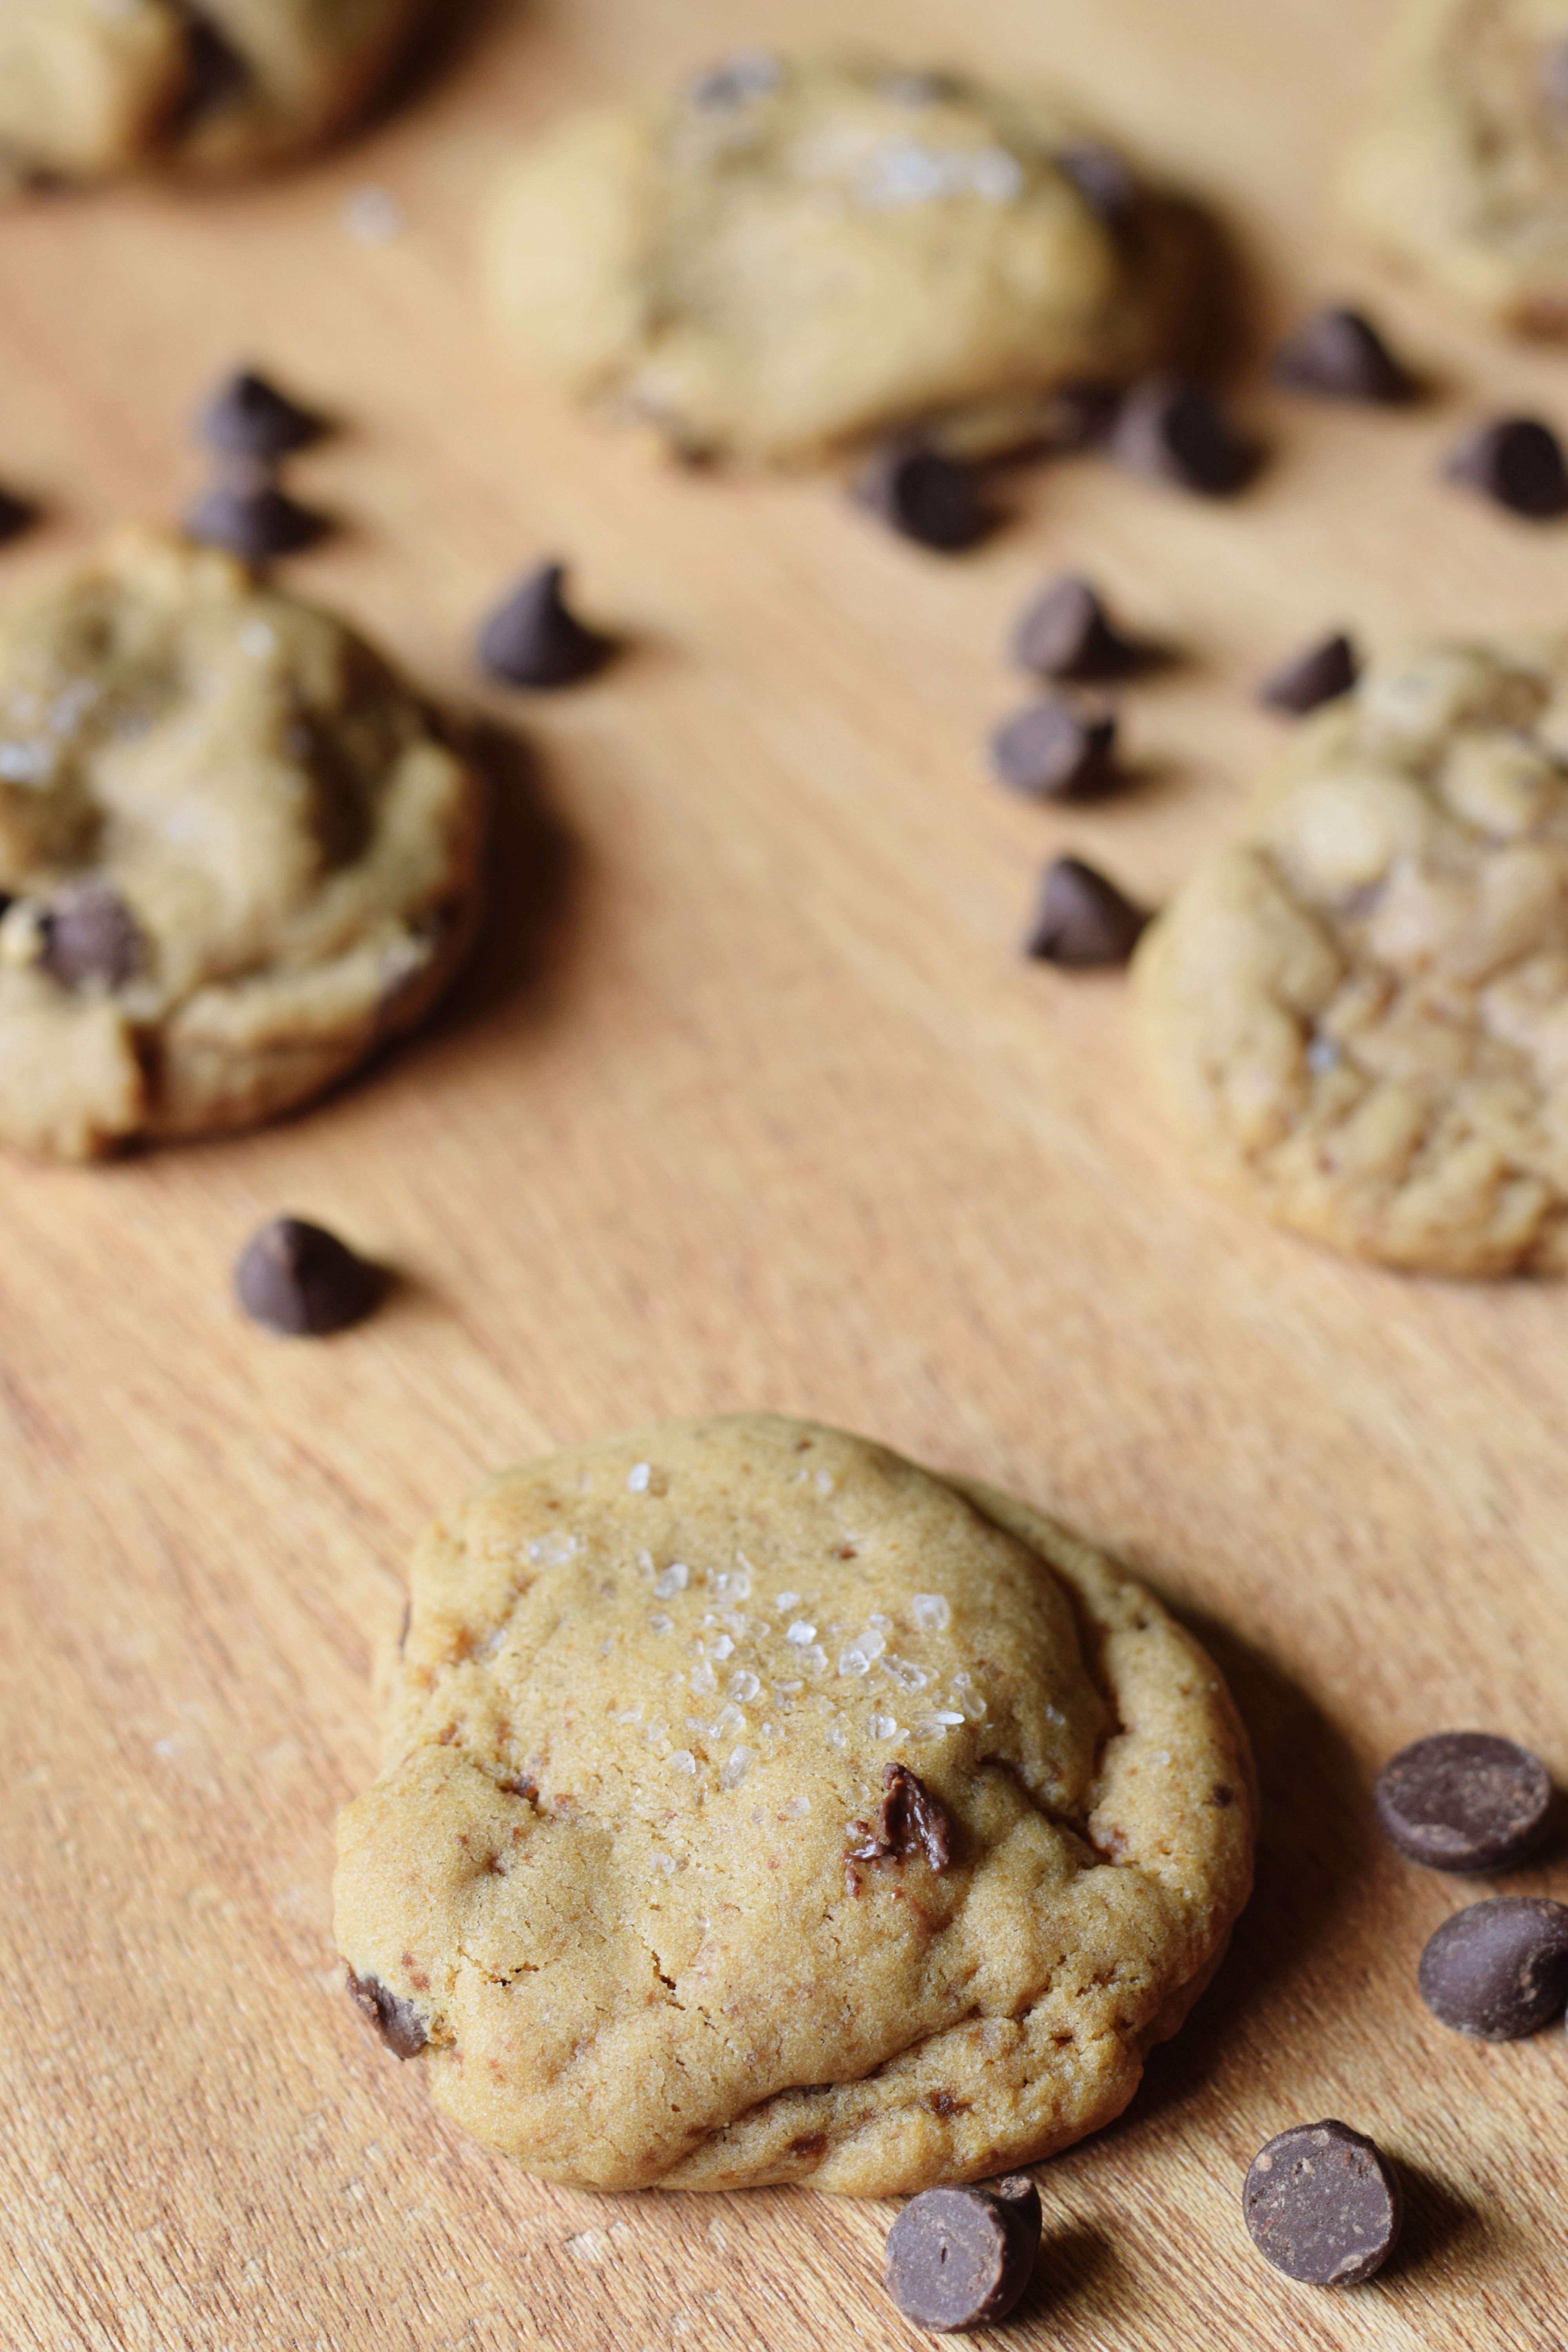 Gluten Free Salted Chocolate Chip Cookies - Easy Gluten Free Cookie Recipe - Gluten Free Cookie Dough - Easy Cookie Recipe - Gluten Free Dessert - Gluten Free Holiday Recipe - Communikait by Kait Hanson